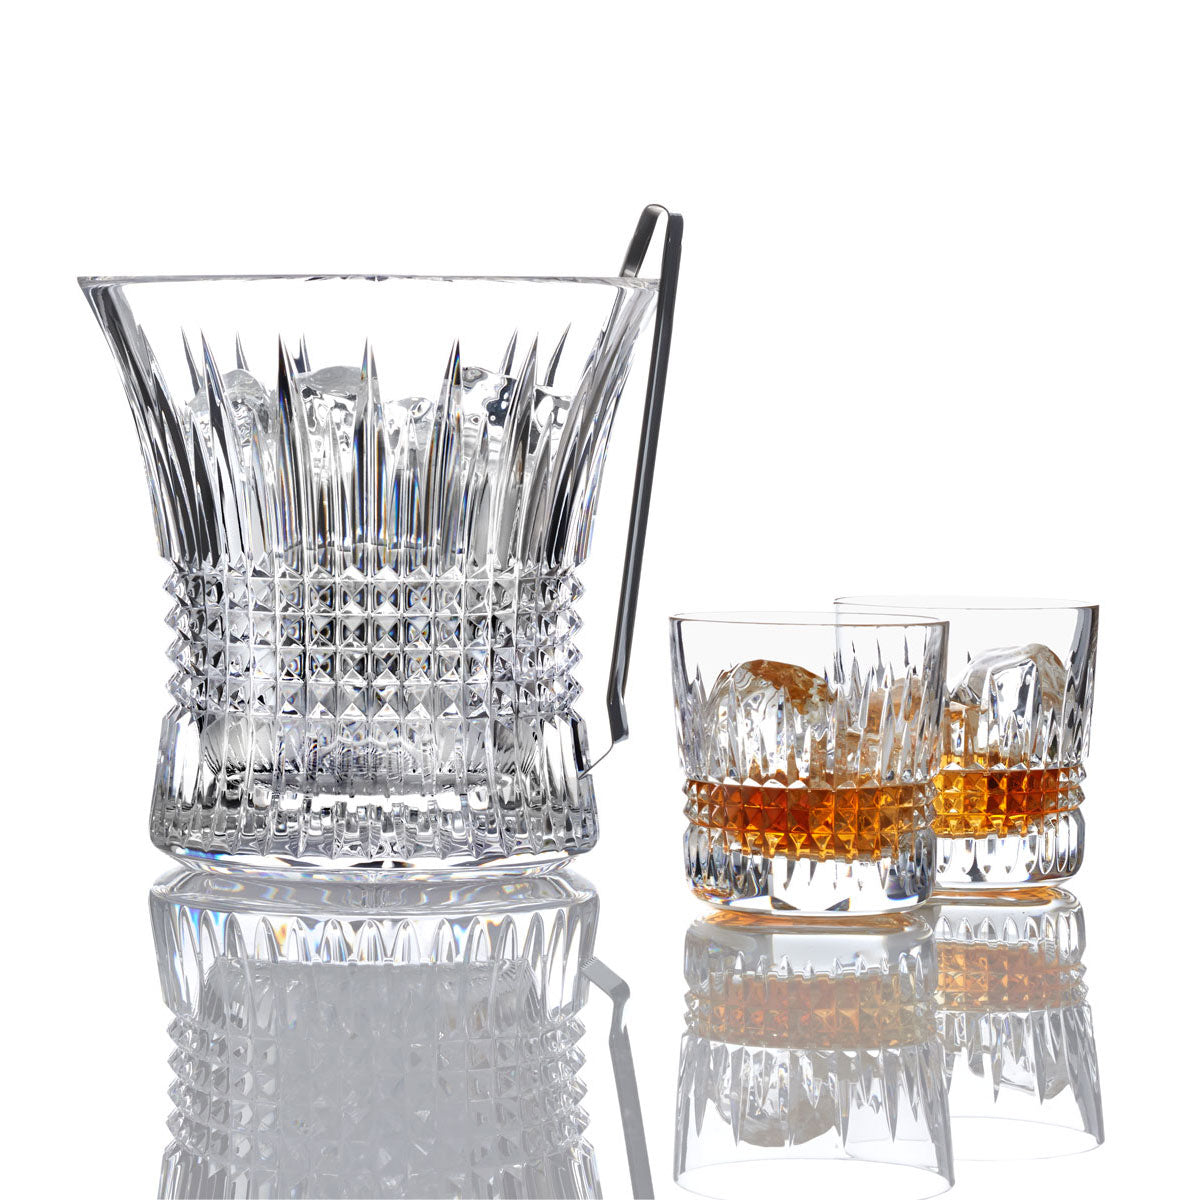 Lismore Diamond Ice Bucket With Tongs by Waterford  The Lismore Diamond pattern is a strikingly modern reinvention of the Waterford classic, characterized by intricate diamond cuts rendered in radiant fine crystal.